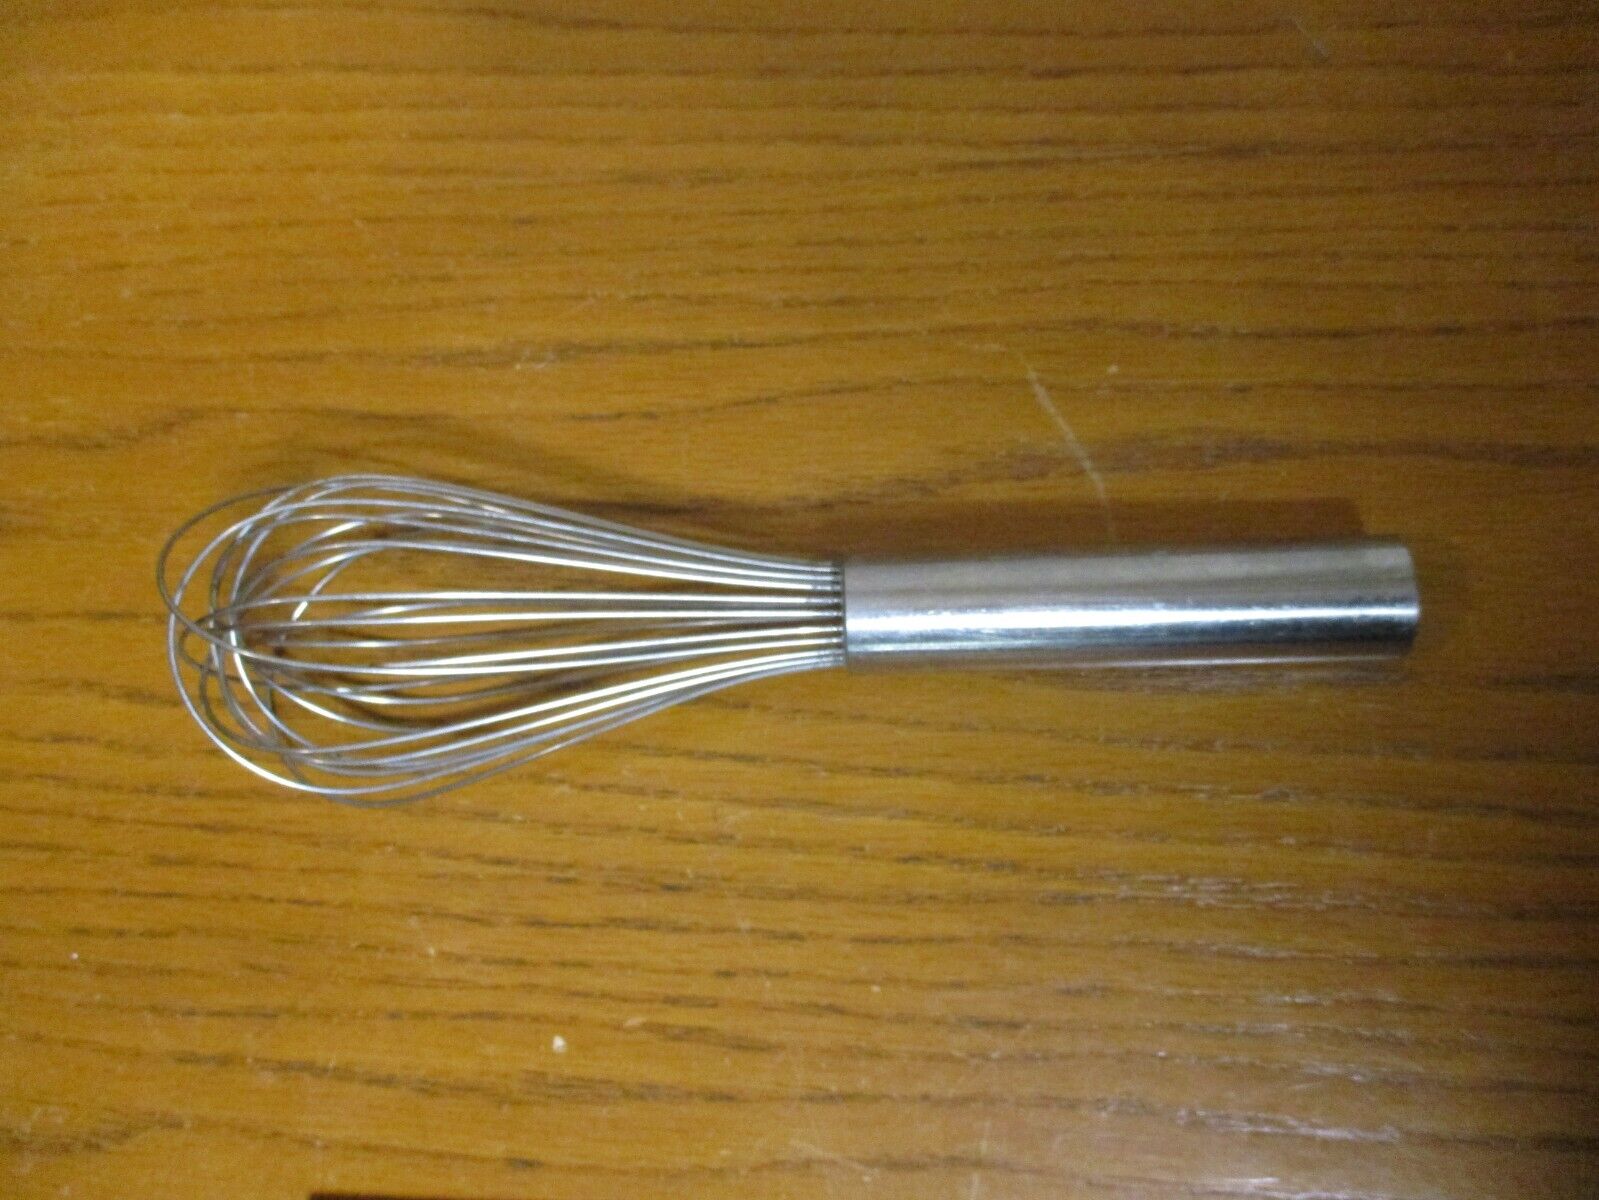 Halco Deluxe French Whisk Whip - Stainless Steel - 10"